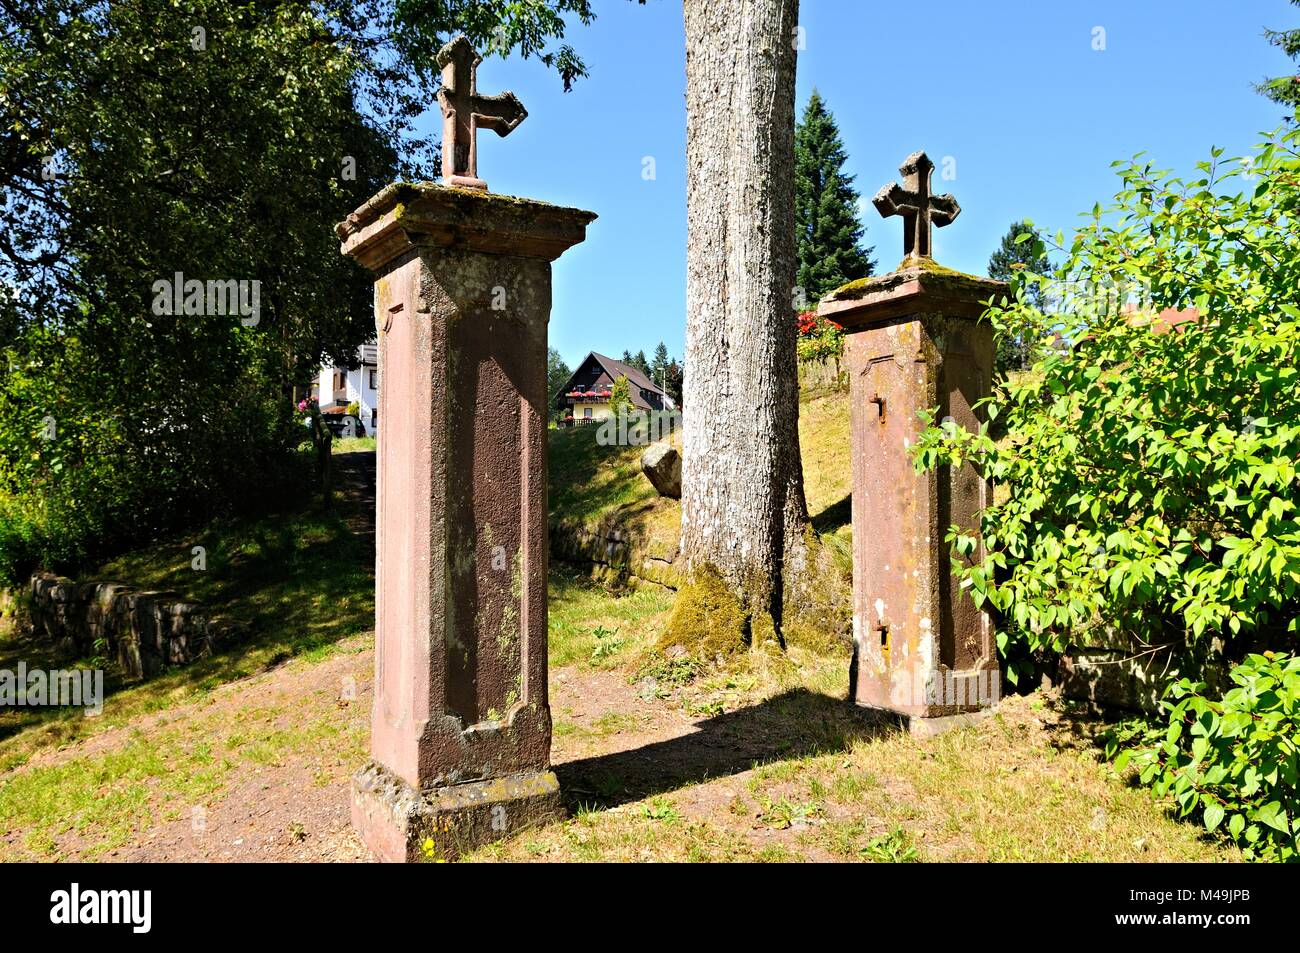 Entrance to the former monastery in Kniebis Schwarzwald Germany Stock Photo